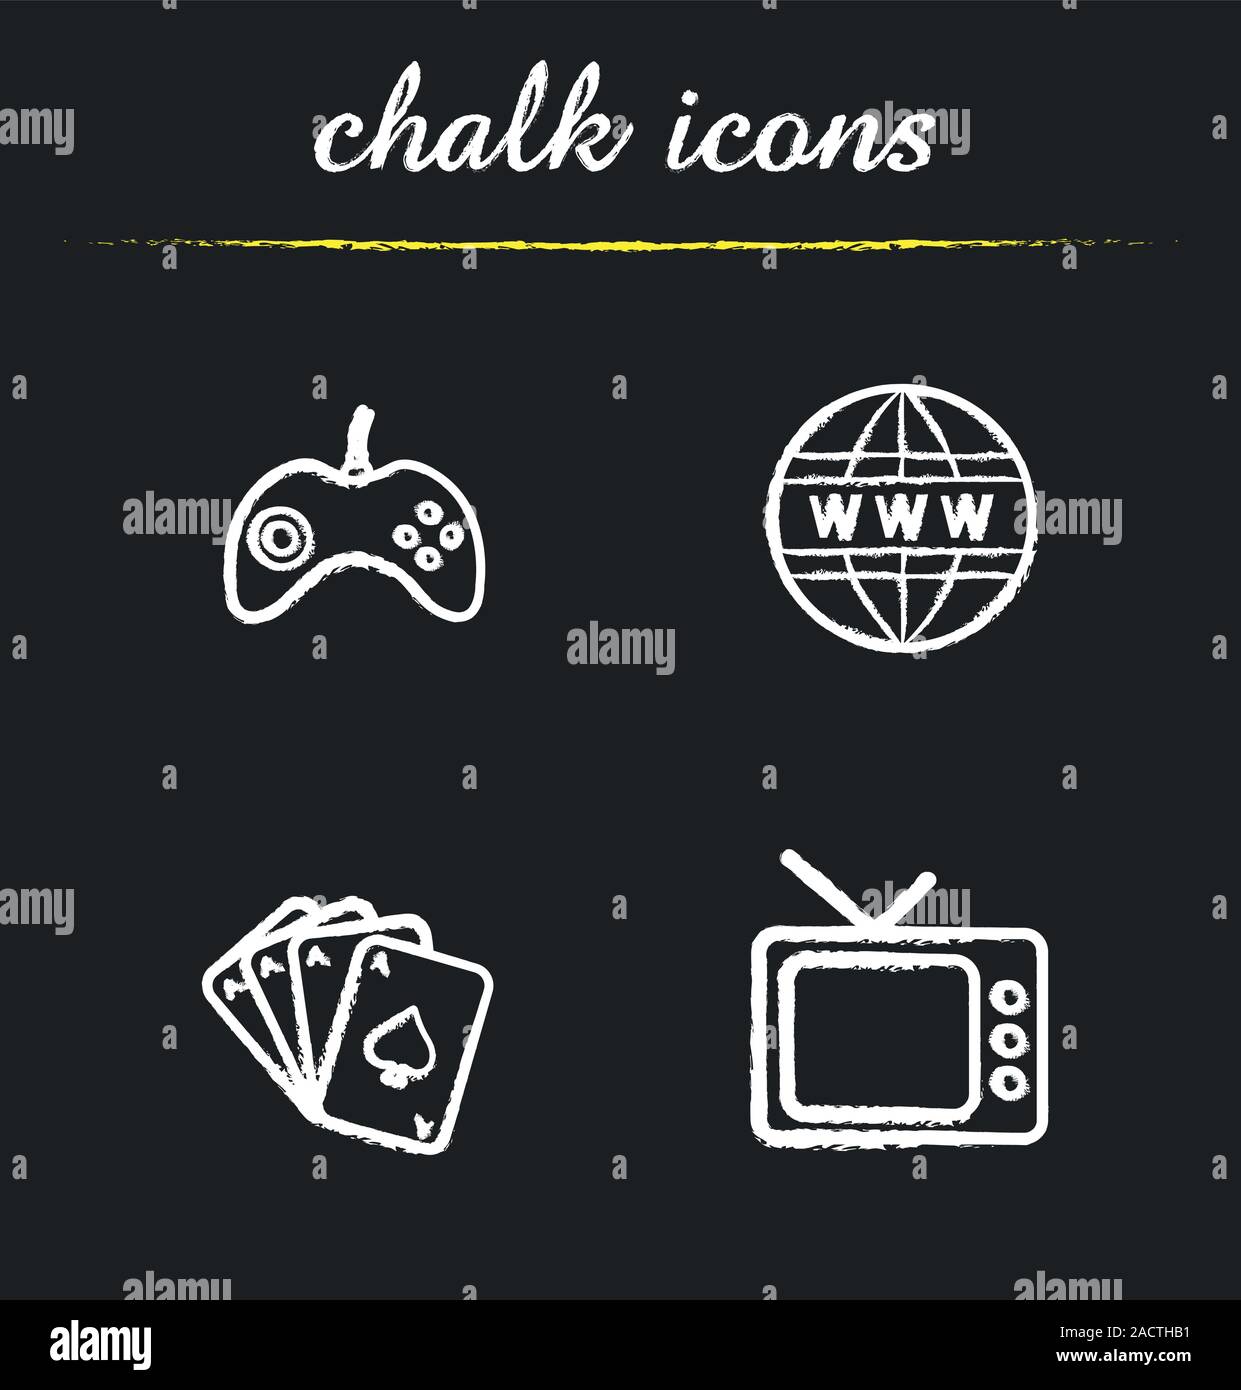 Bad habits chalk icons set. Game console joystick, www network symbol, playing cards deck, retro tv-set. Gambling, internet, gaming and tv addictions. Stock Vector